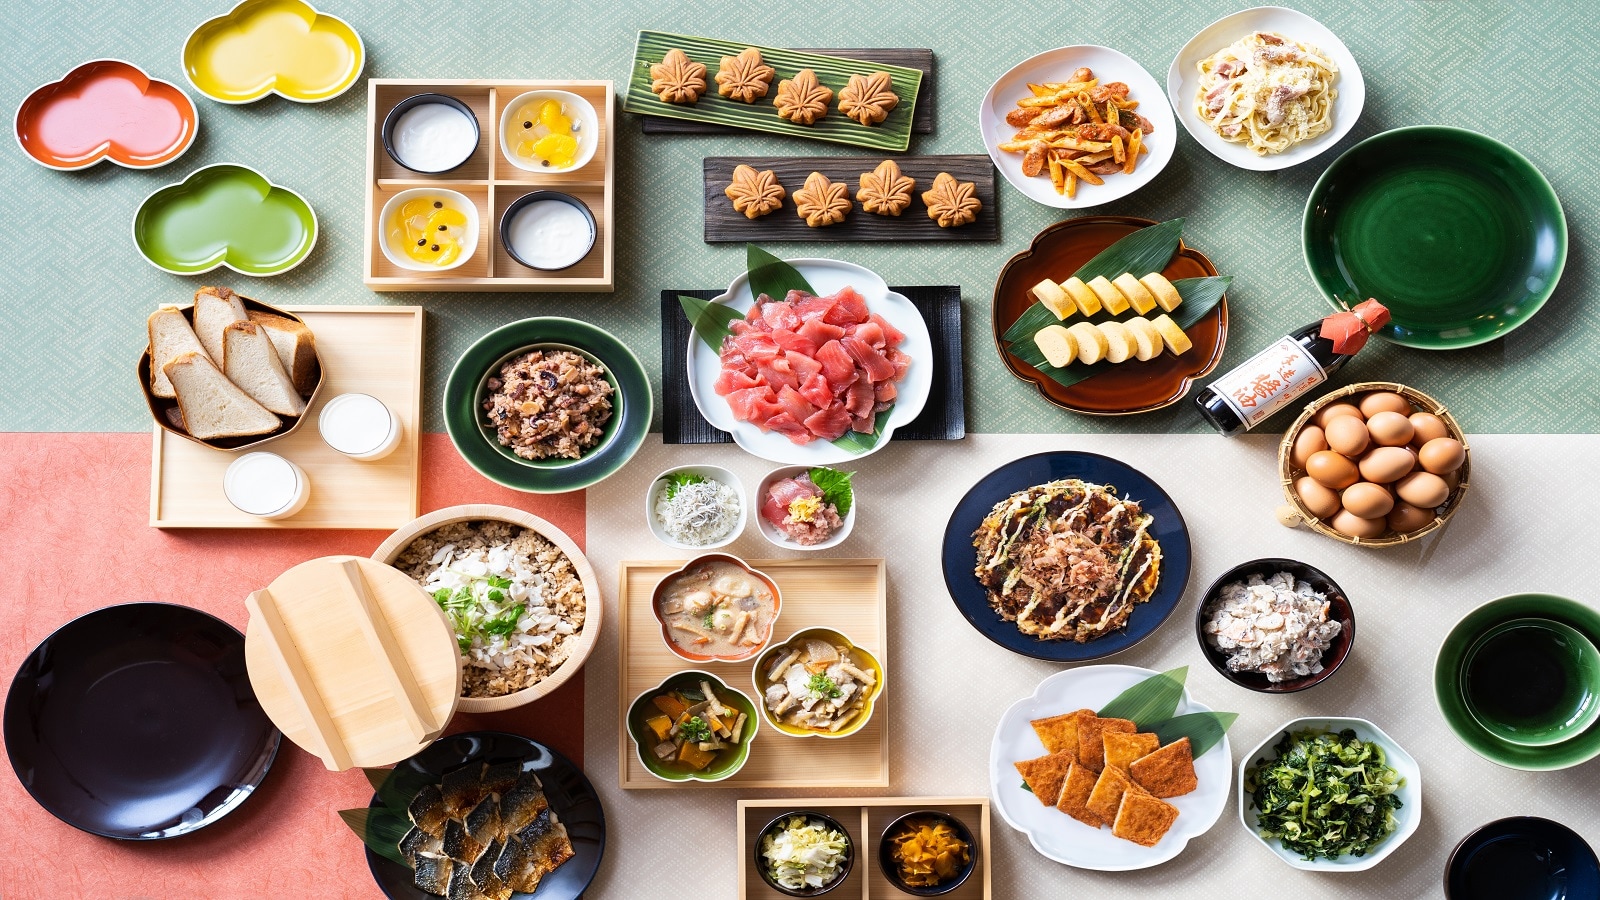 Breakfast where you can enjoy local cuisine and local ingredients from Fukuyama and Hiroshima